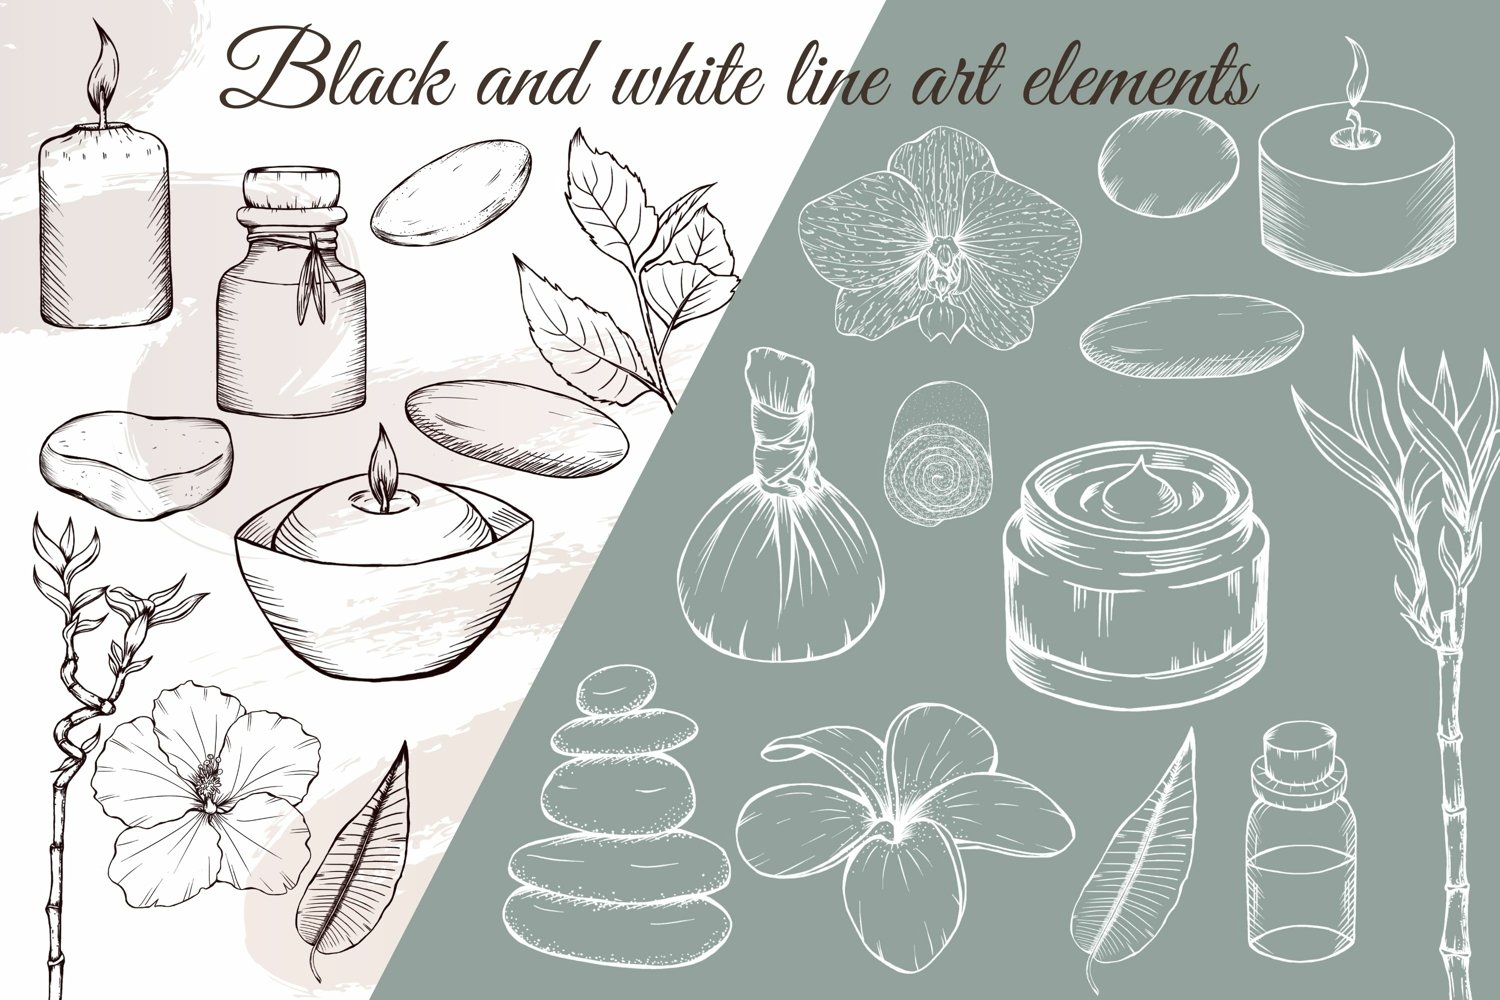 Black and white line art elements.